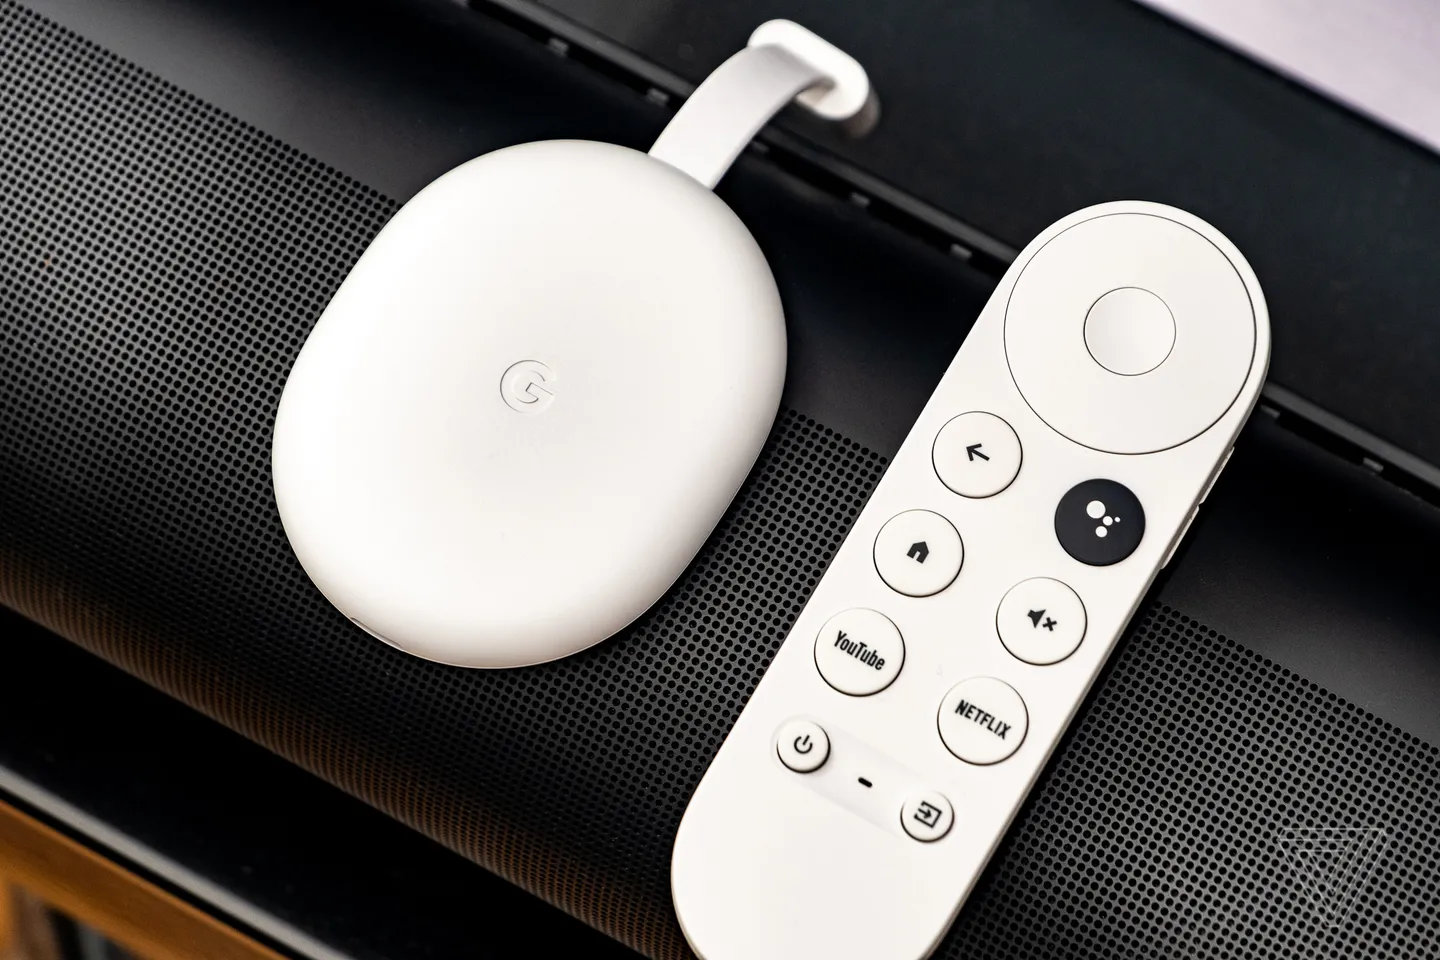 The Google Chromecast with Google TV in white, sitting on top of a soundbar.